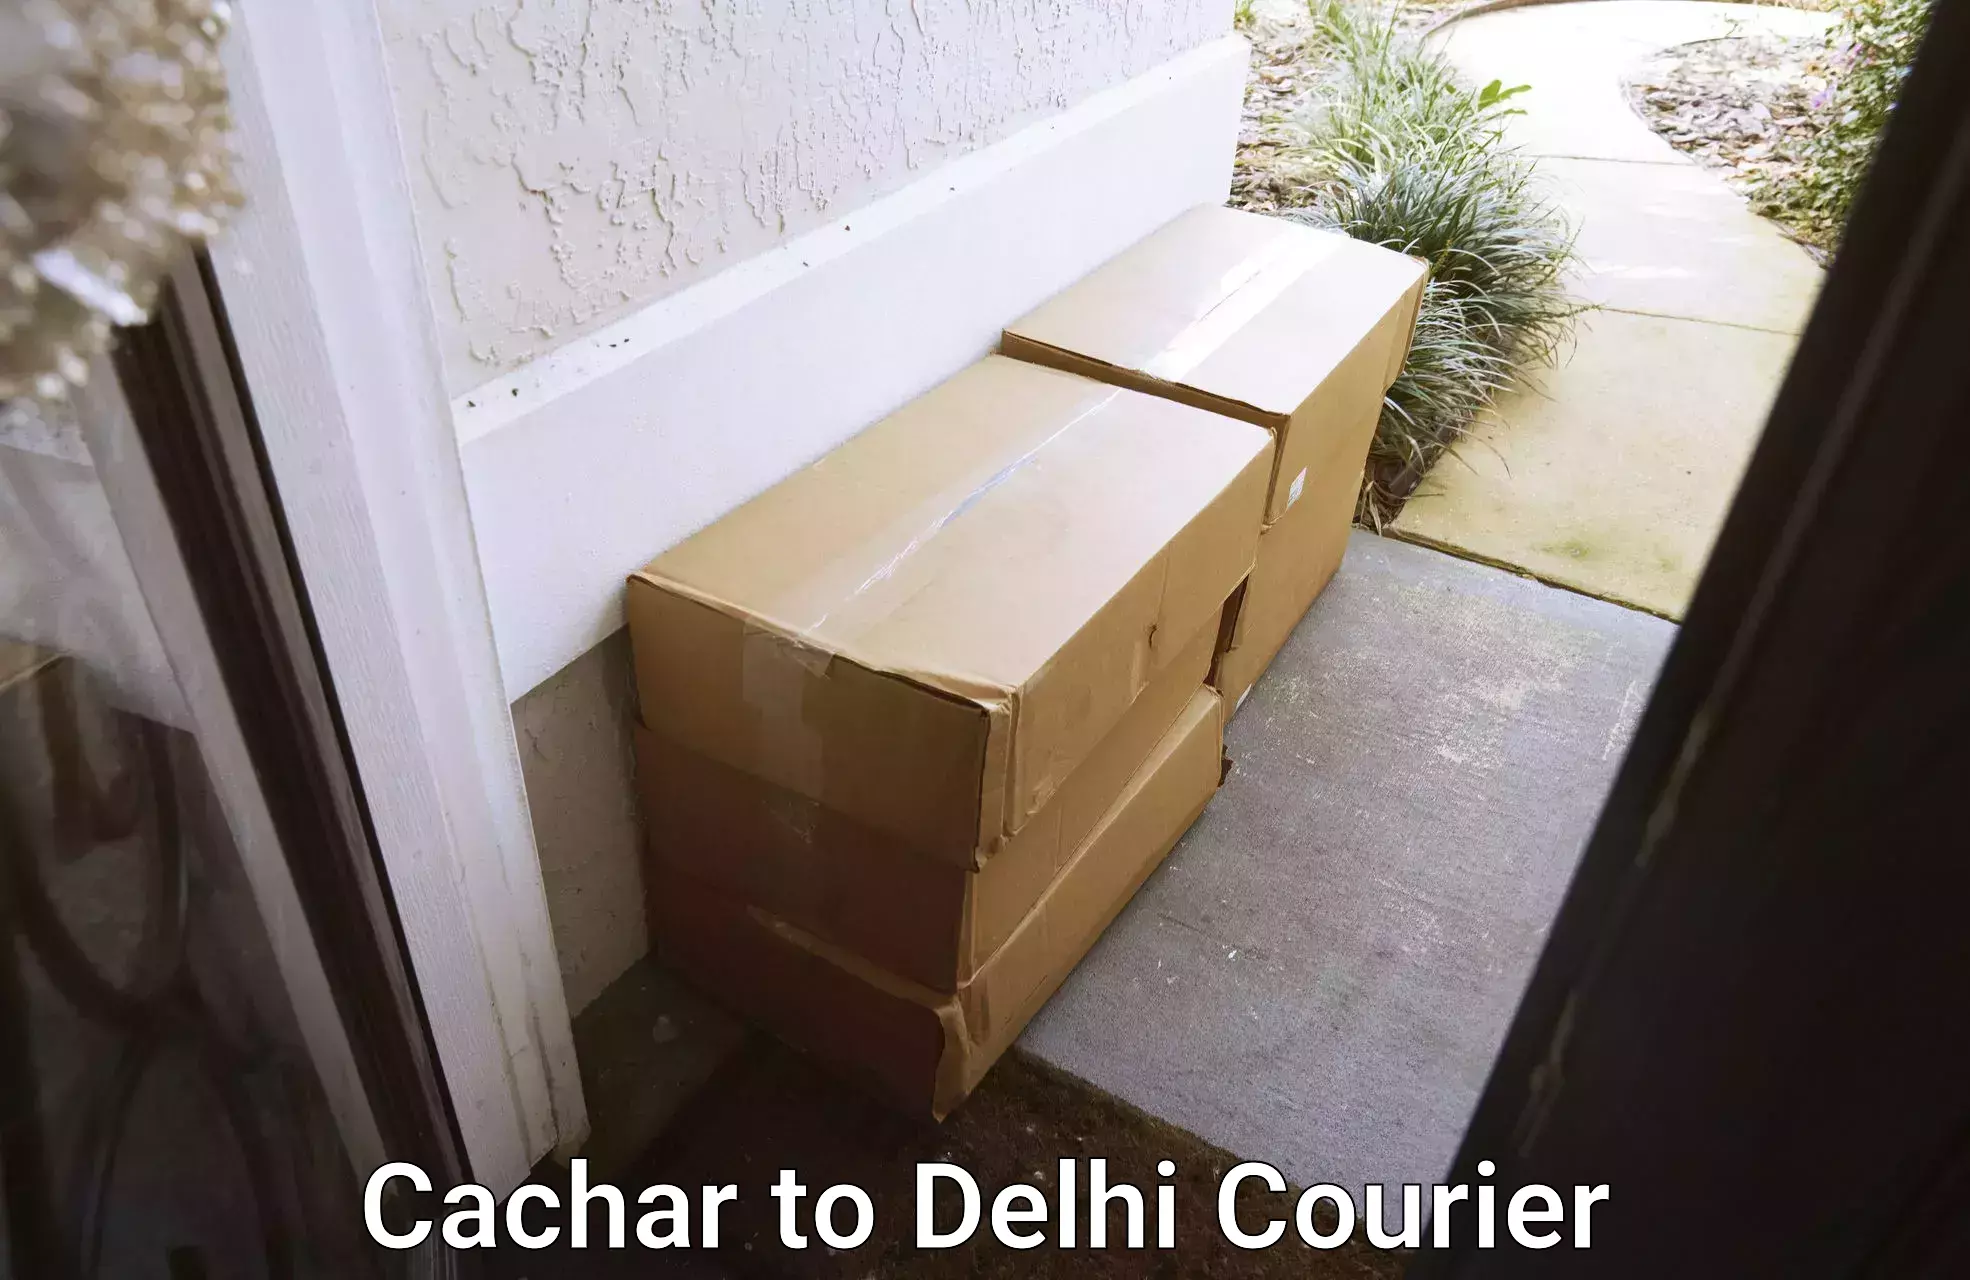 Sustainable courier practices Cachar to Delhi